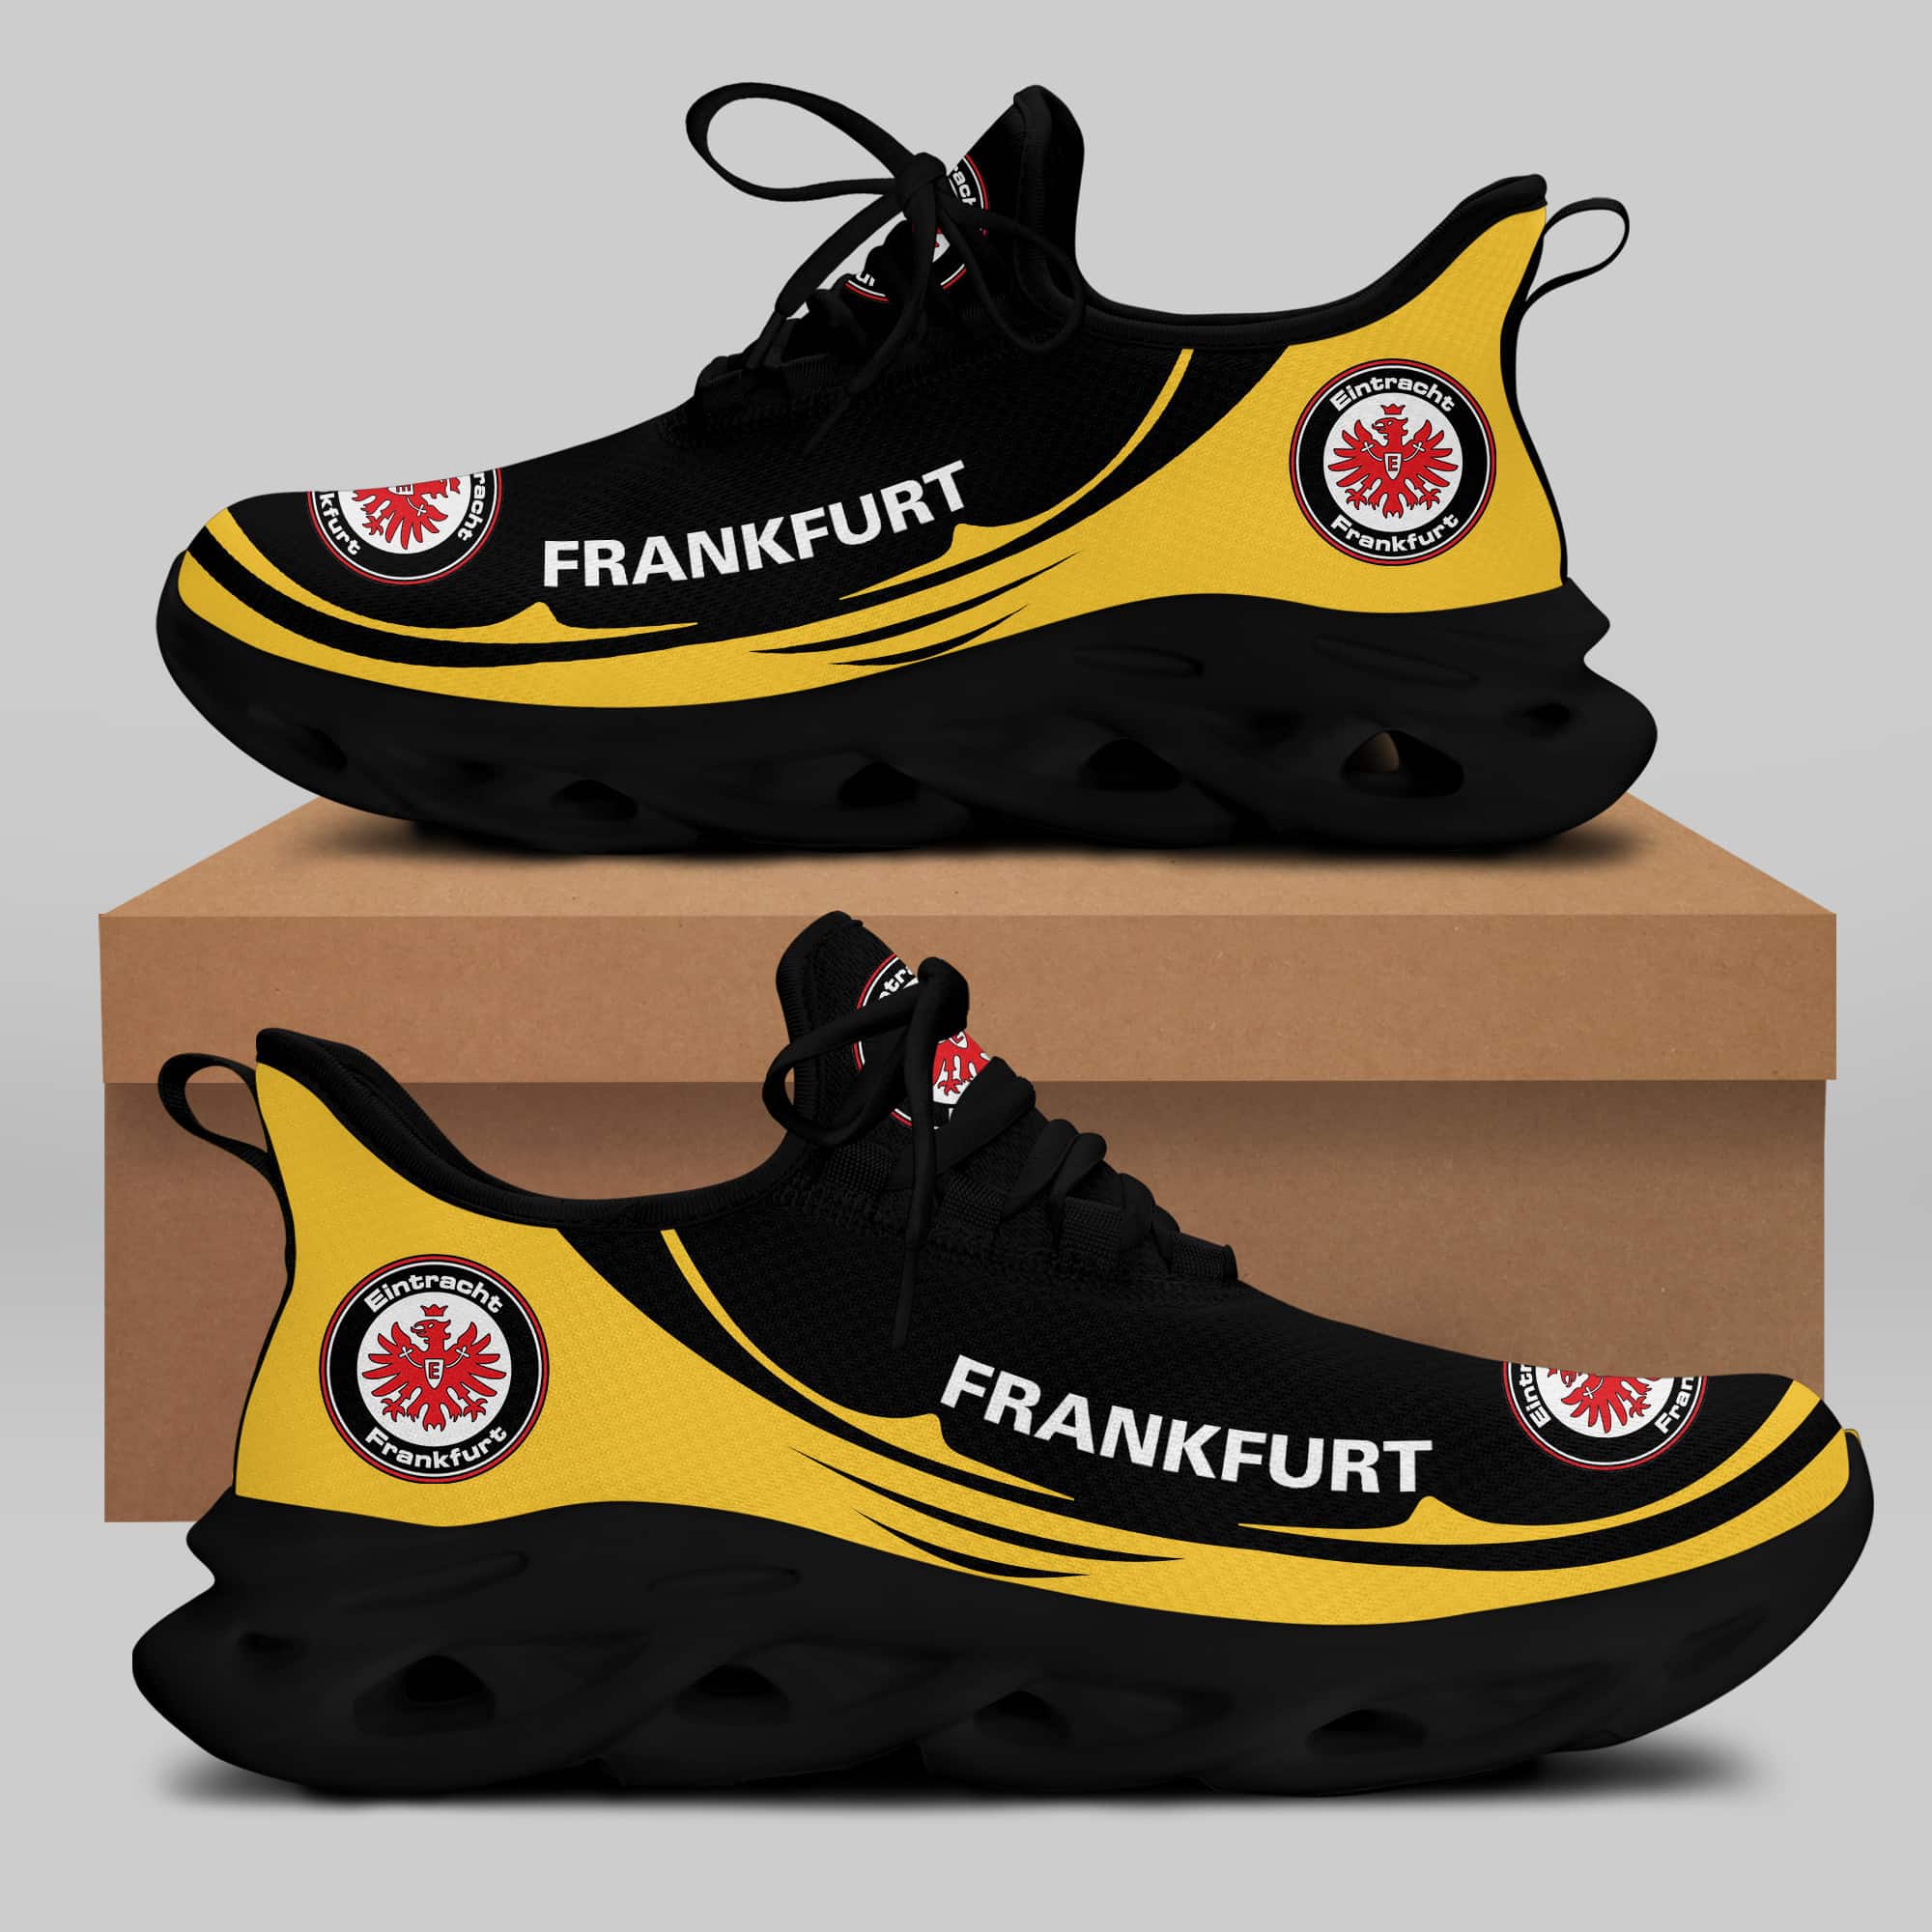 Eintracht Frankfurt Running Shoes Max Soul Shoes Sneakers Ver 22 1